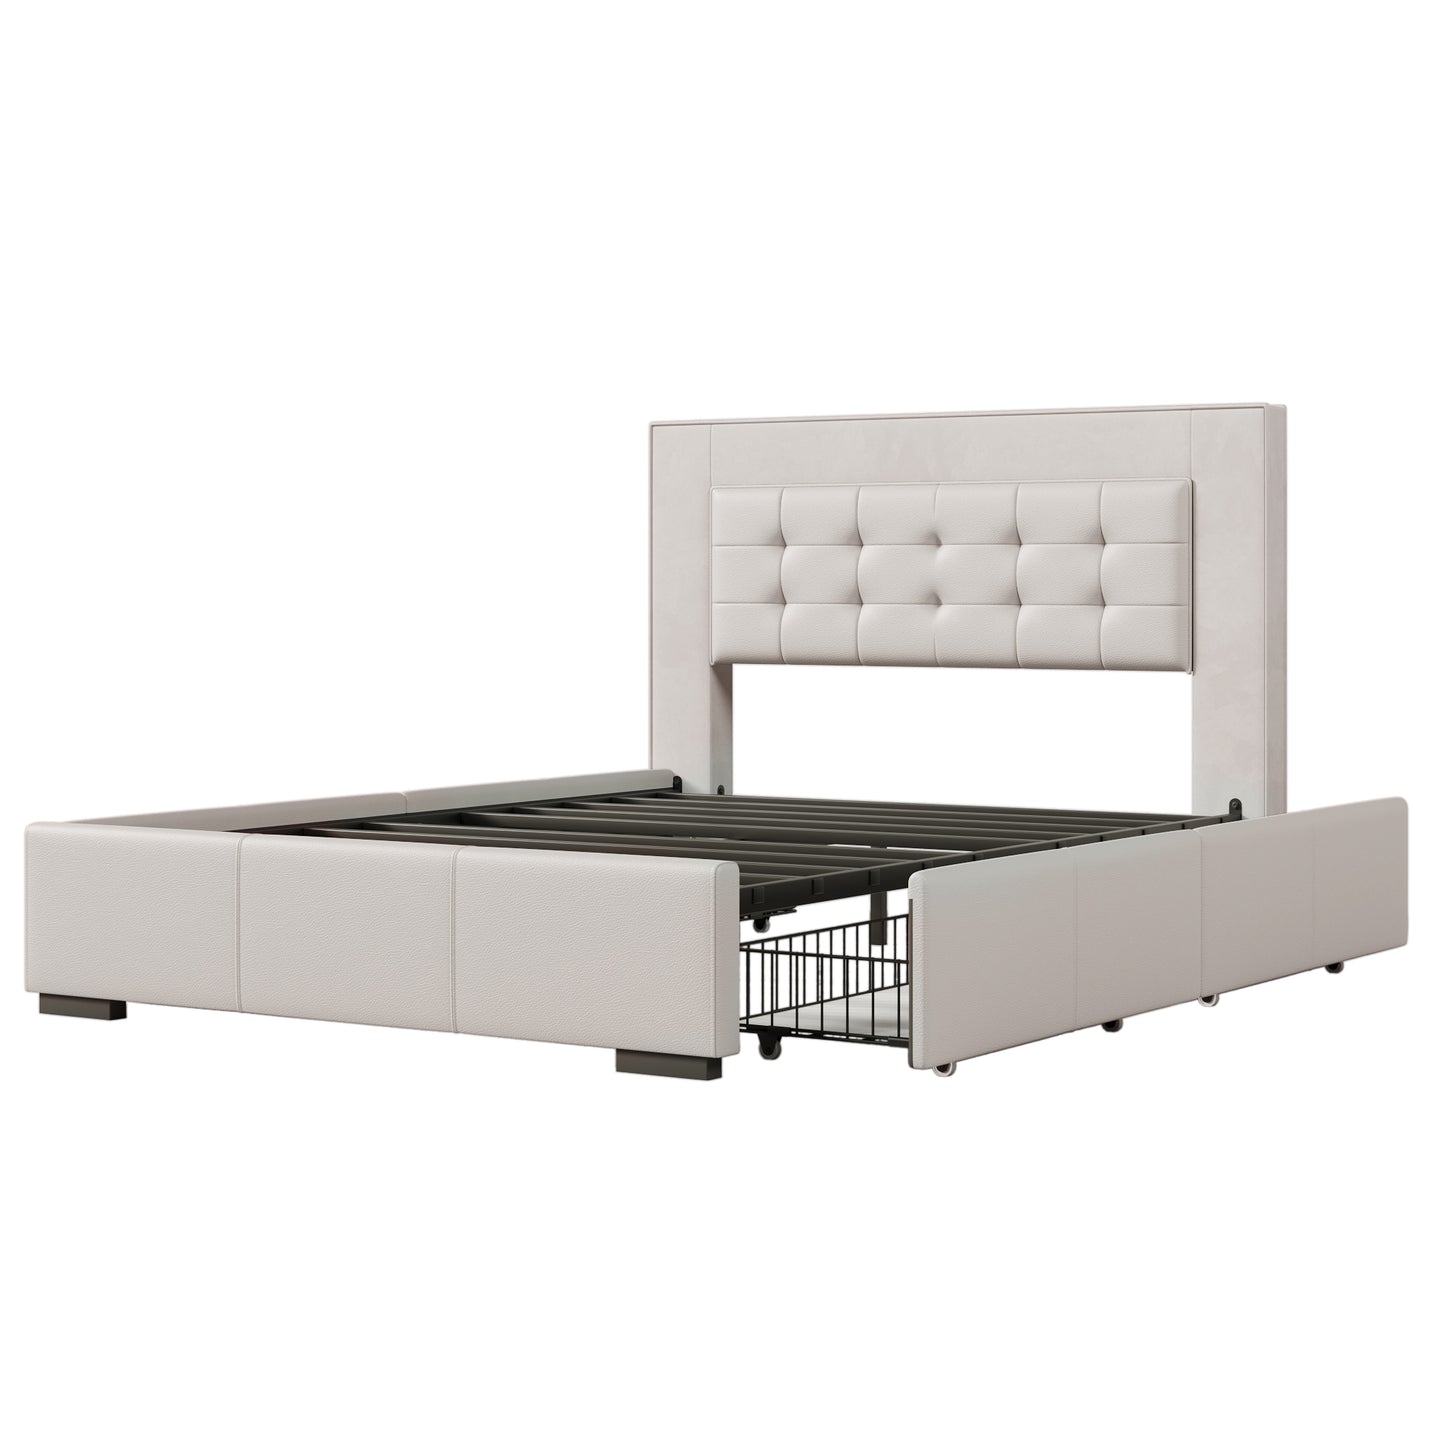 Modern Style Upholstered Queen Platform Bed Frame with Four Drawers, Button Tufted Headboard with PU Leather and Velvet, Beige